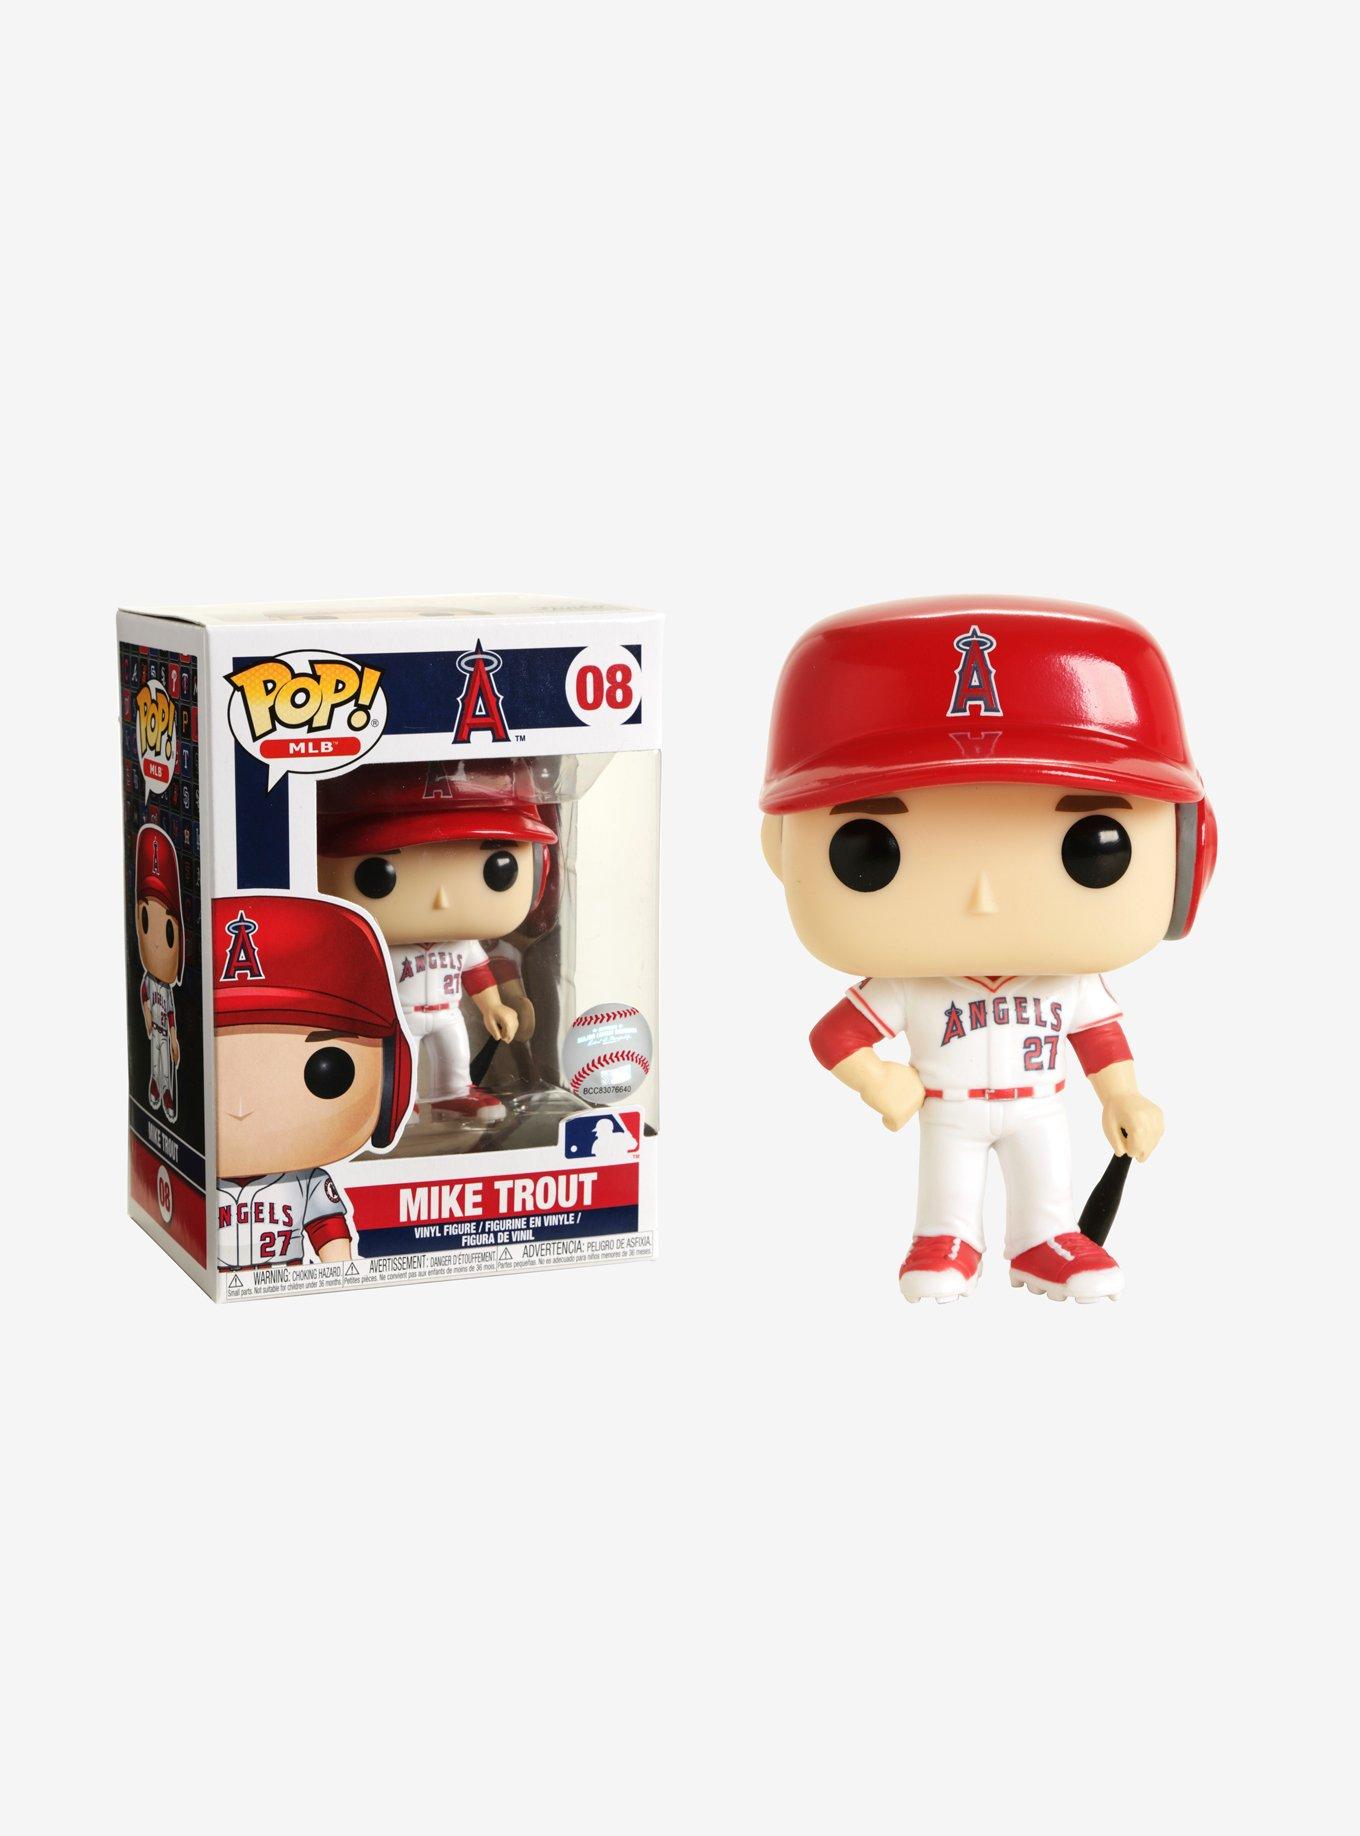 POP! Sports MLB Los Angeles Angels, Mike Trout Away Jersey Action Figure  (Bundled with Pop Box Protector to Protect Display Box)